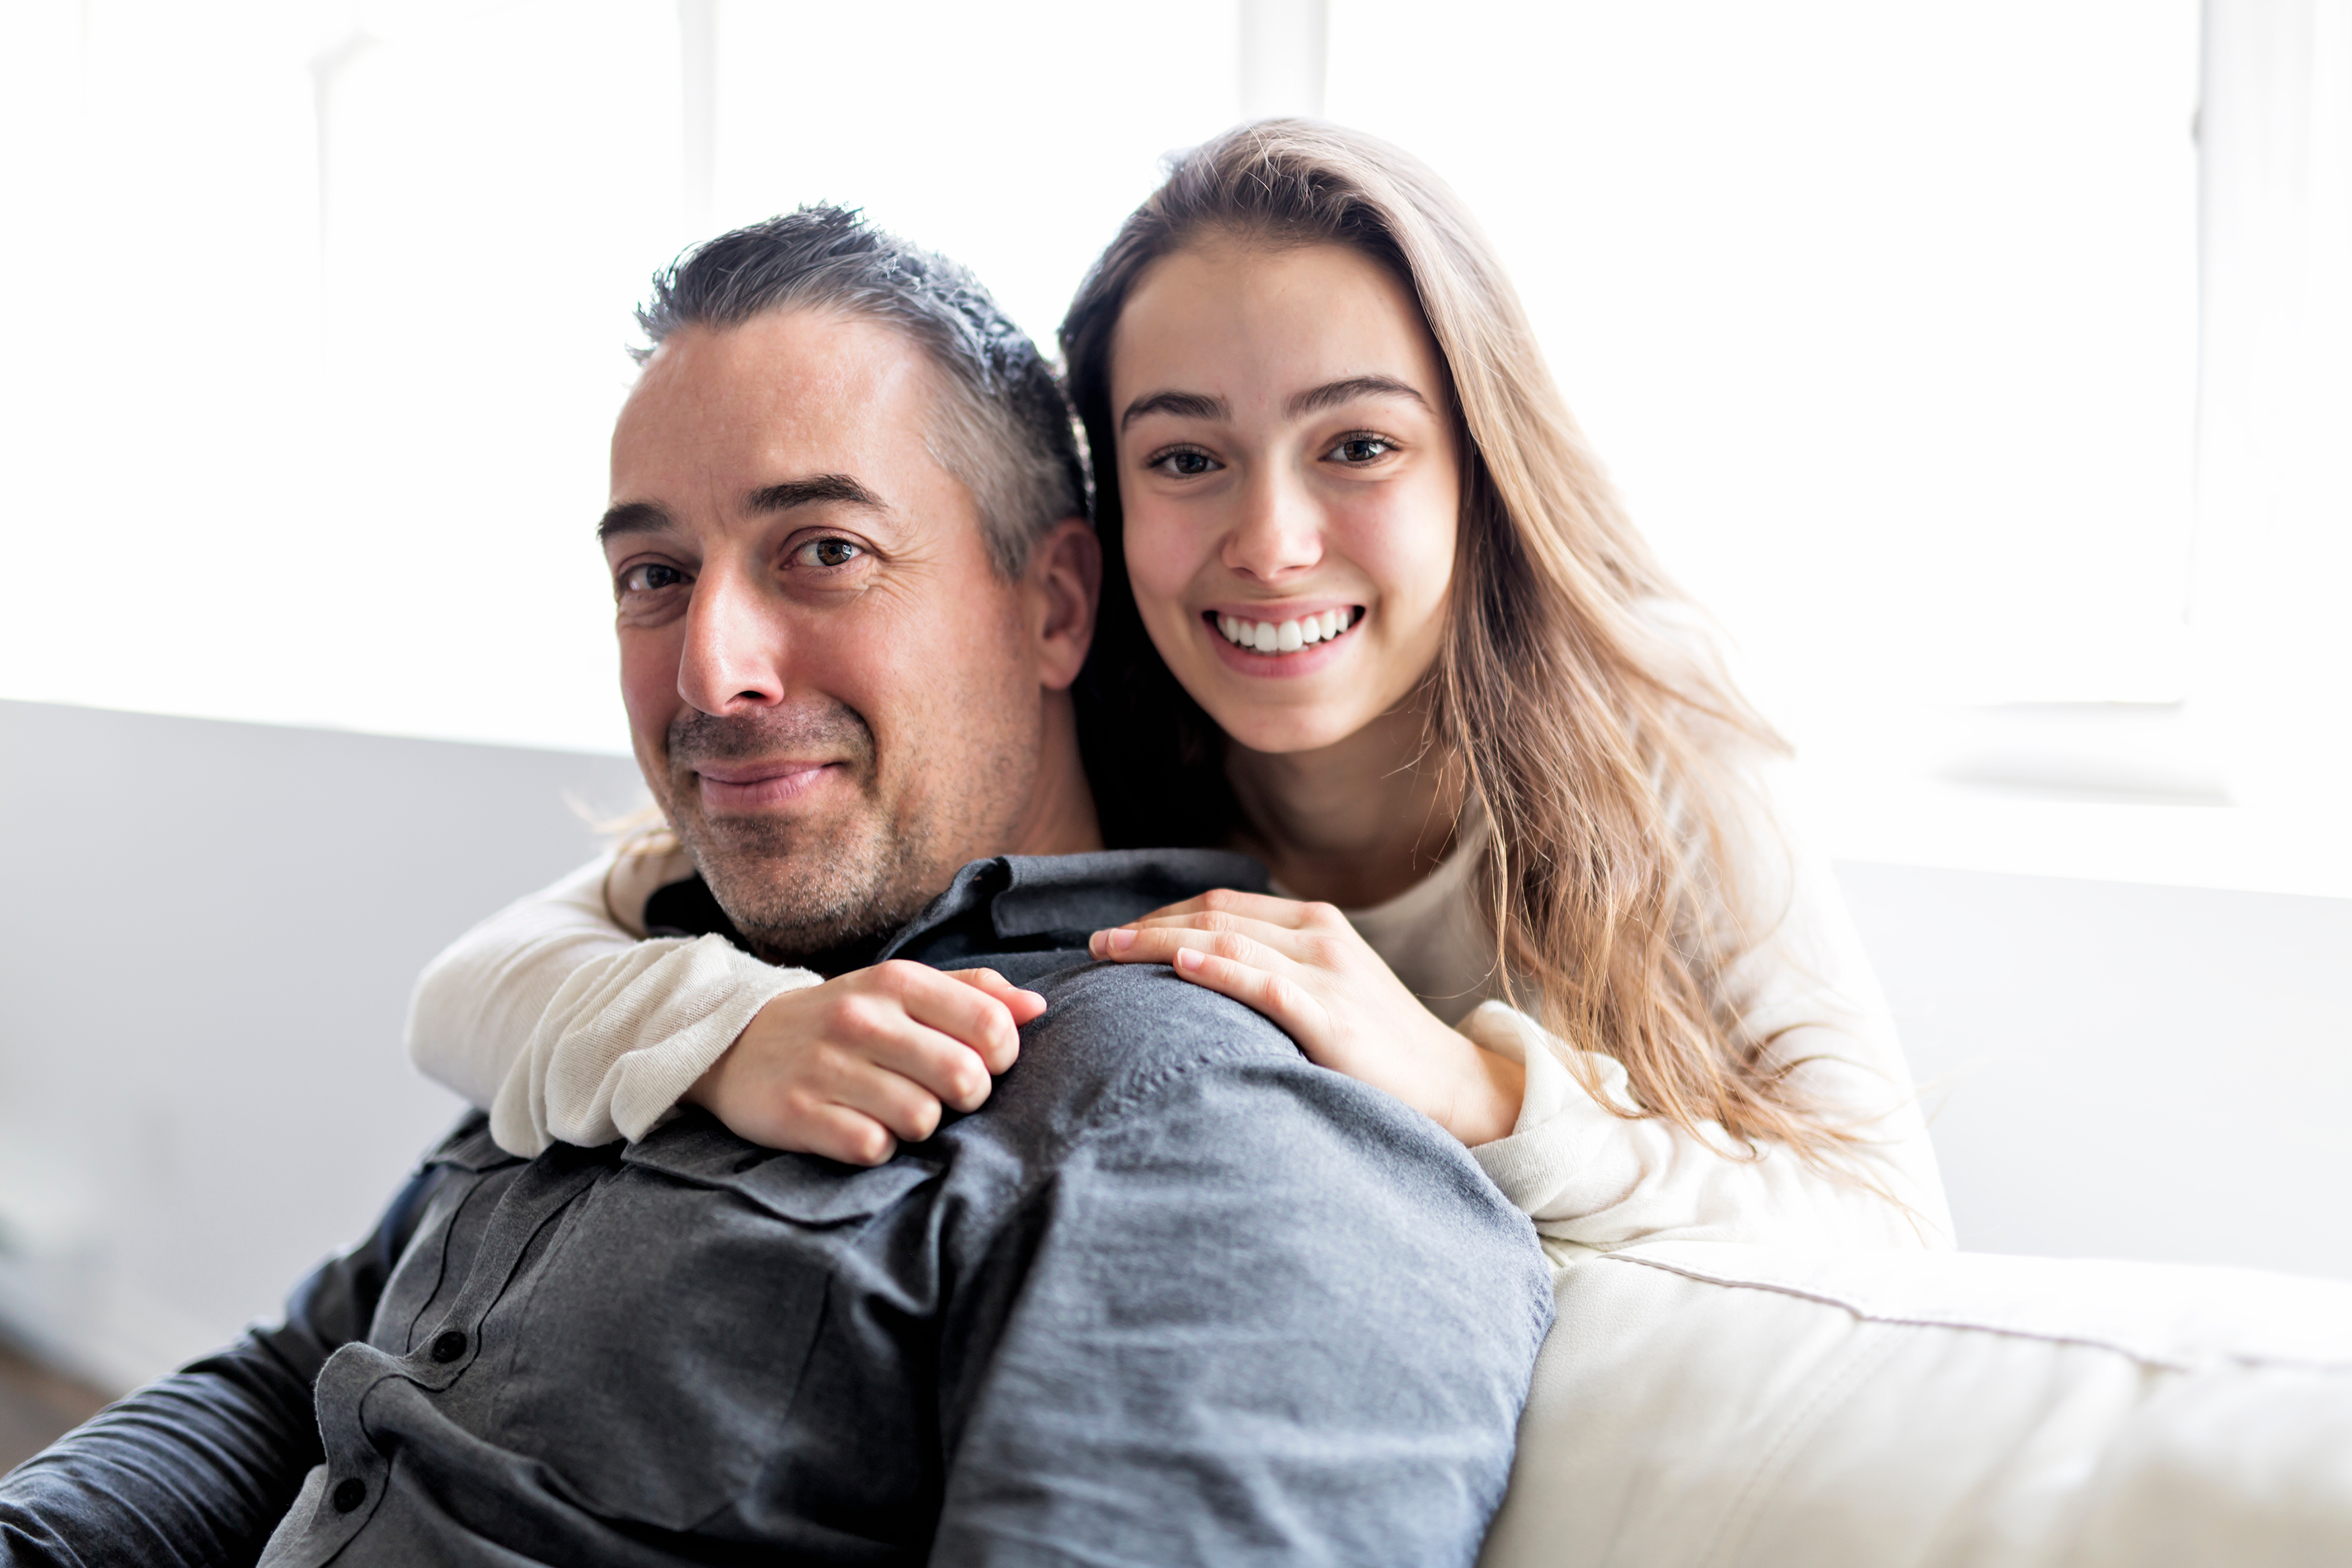 A happy teenage girl hugging her father | Source: Shutterstock